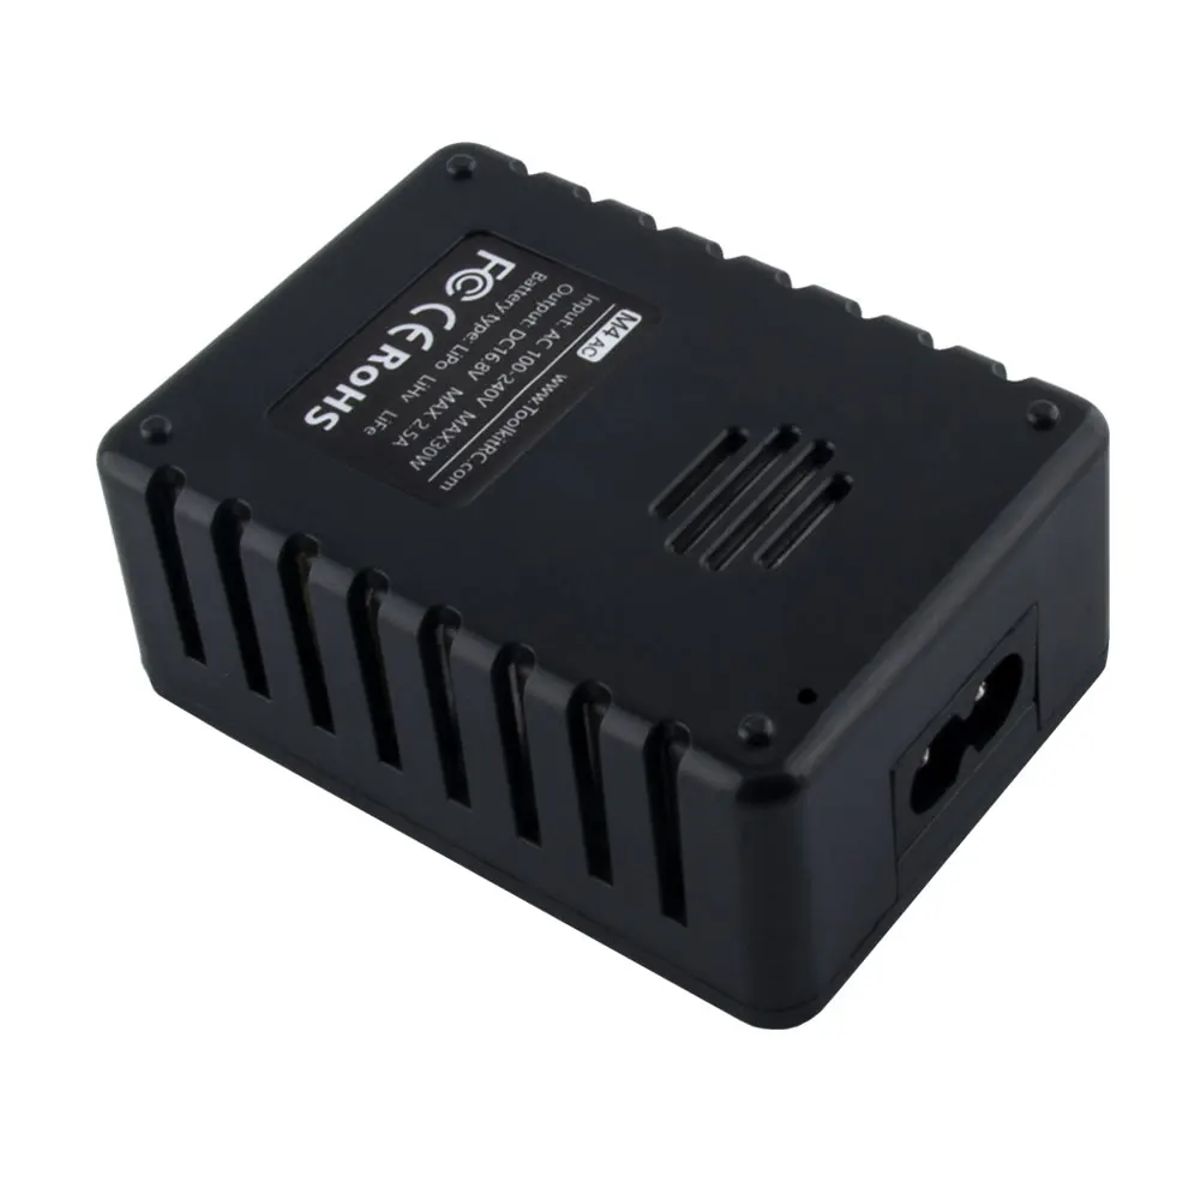   ToolkitRC M4AC Compact charger